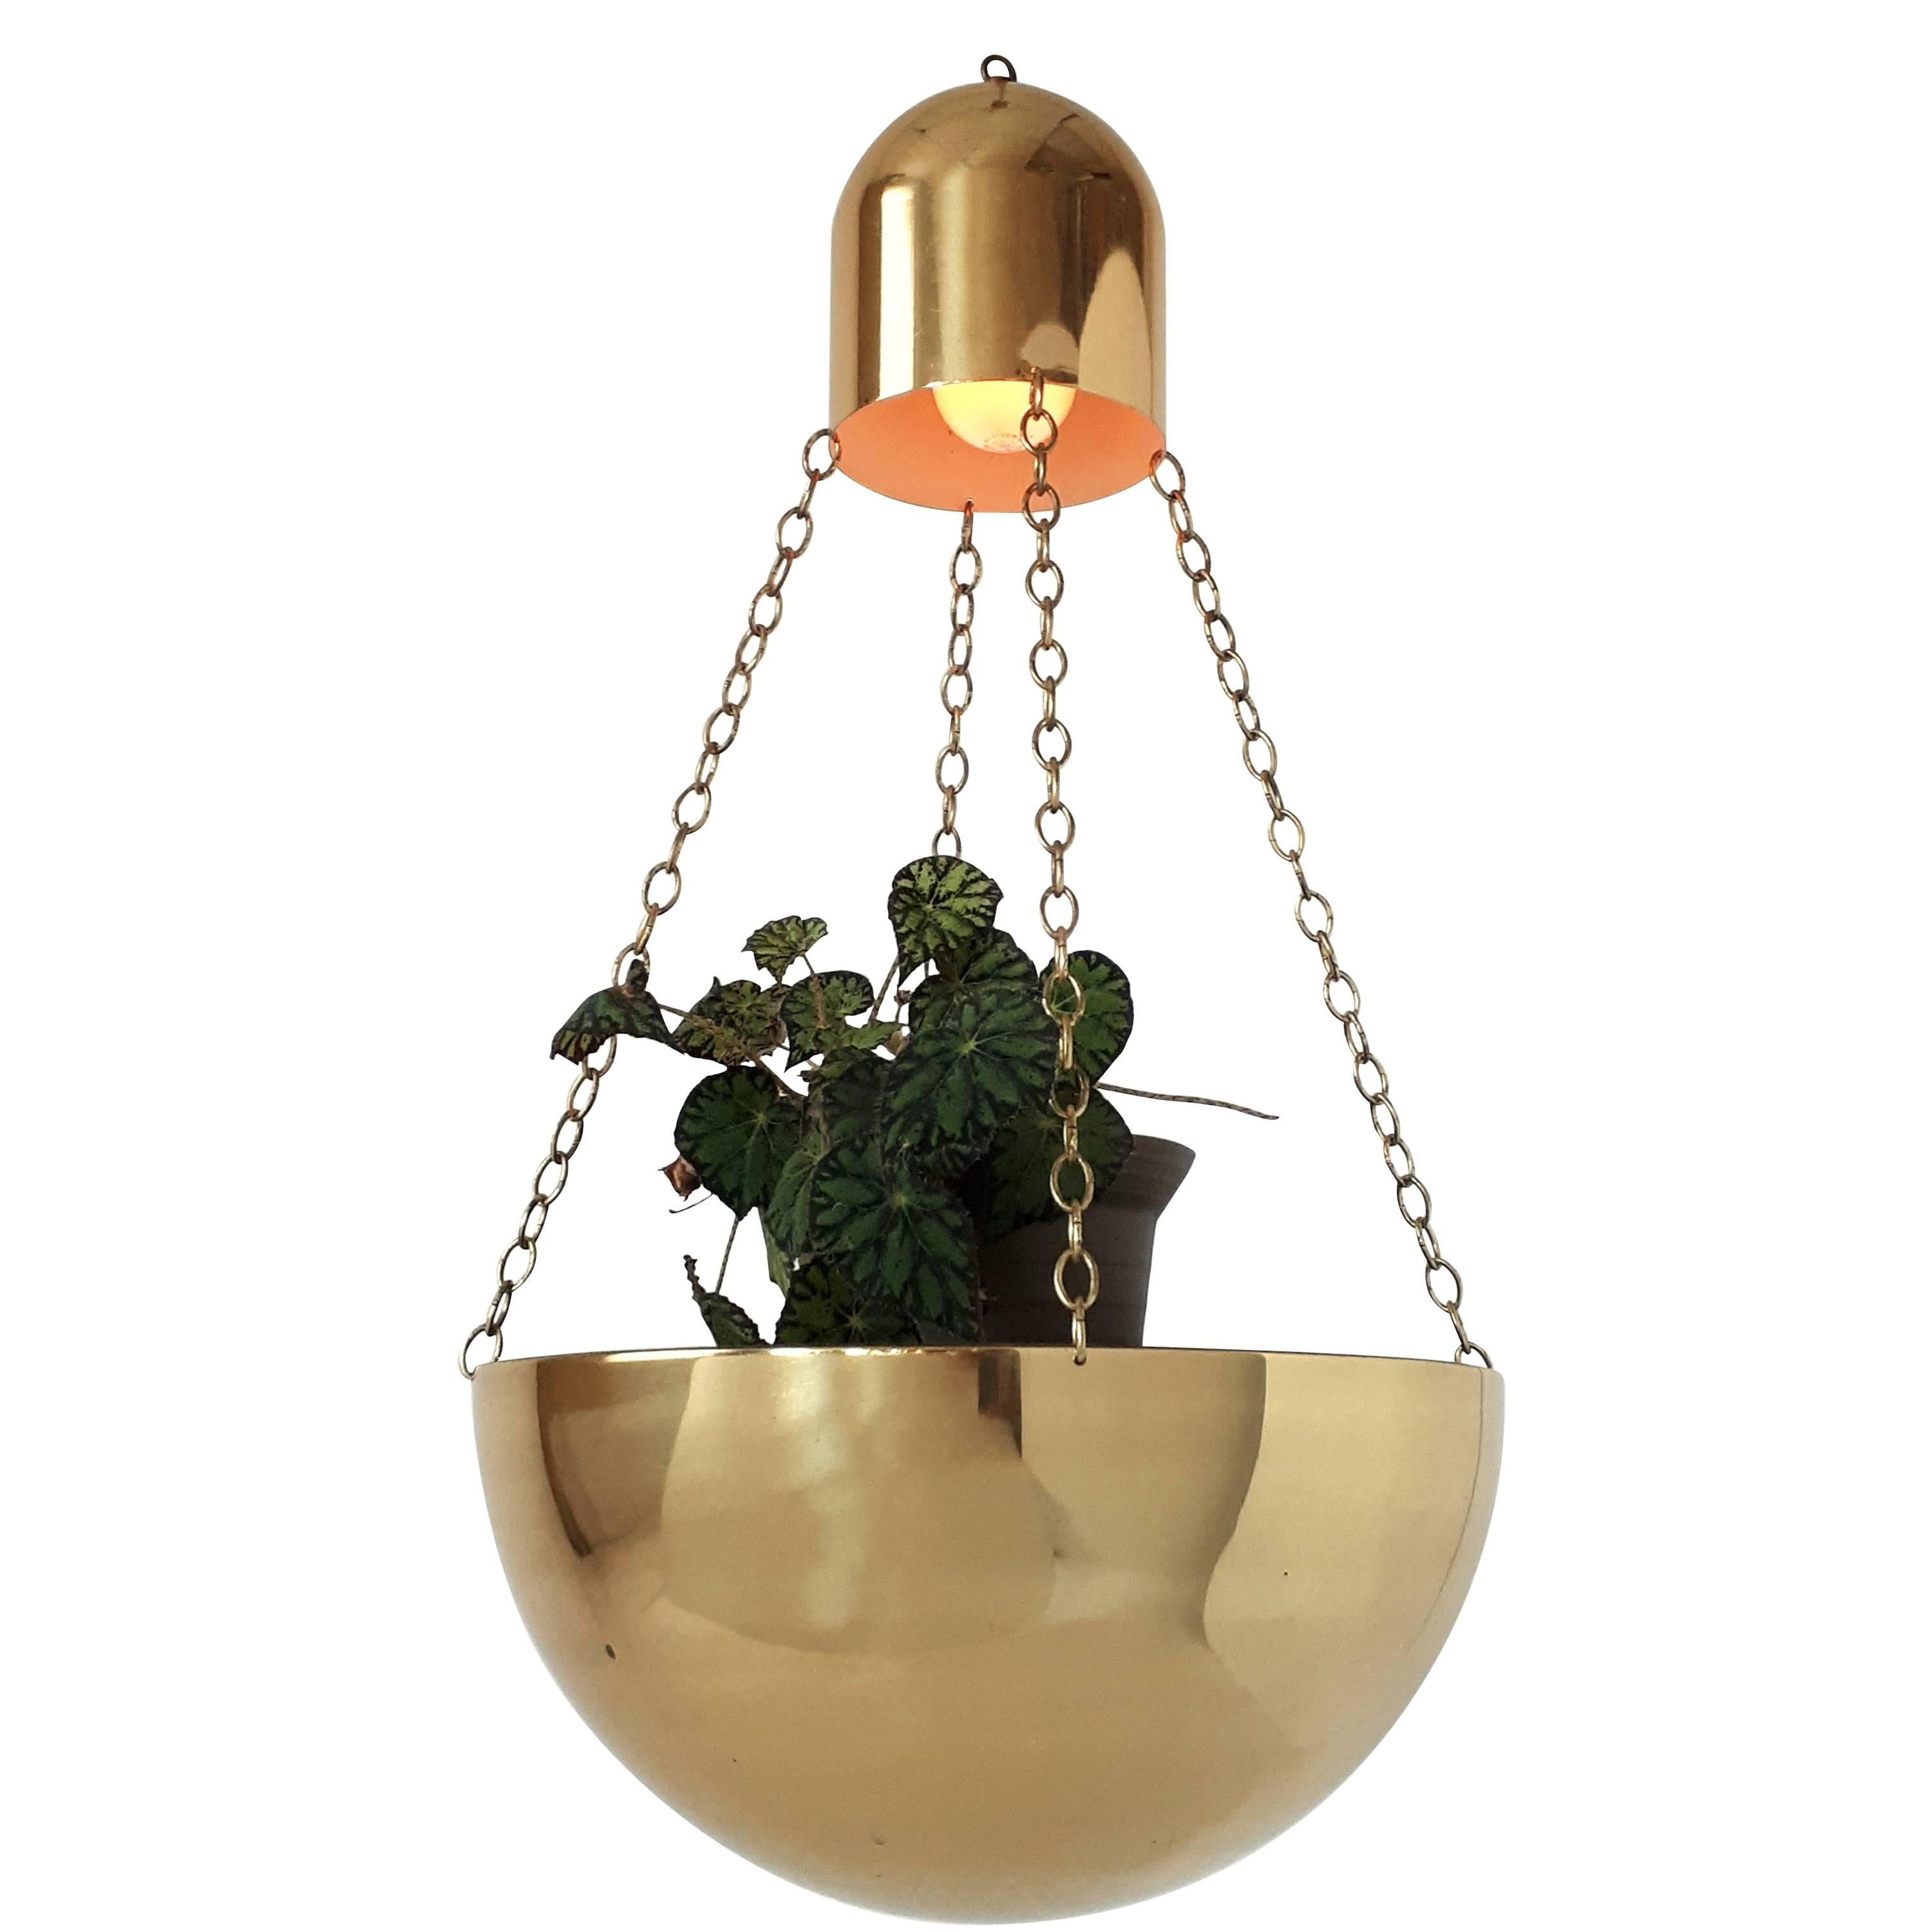 Large brass-plated lighted planter with chain. 

The top vented part contain one regular E26 size socket rated at 100 watts max.

Measure 30 inches high by 15.75 wide. 

Come with 12 feet of wire with a  chain of equal lenght to support weight of